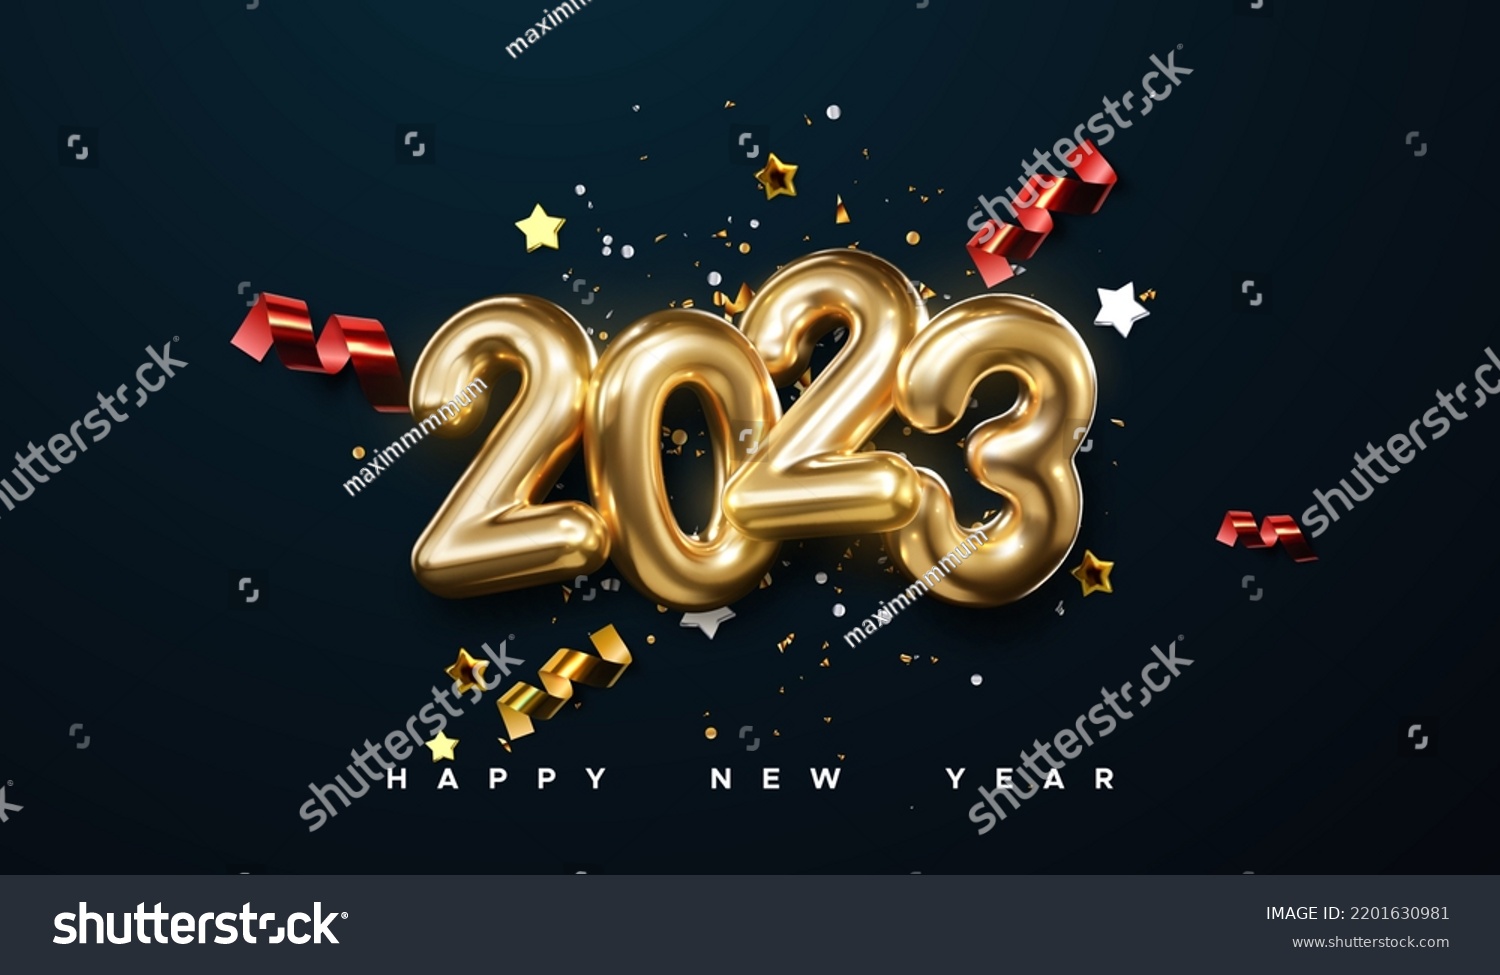 Realistic 2023 golden numbers with festive confetti, stars and spiral ribbons on black background. Vector holiday illustration. Happy New 2023 Year. New year ornament. Decoration element with tinsel #2201630981